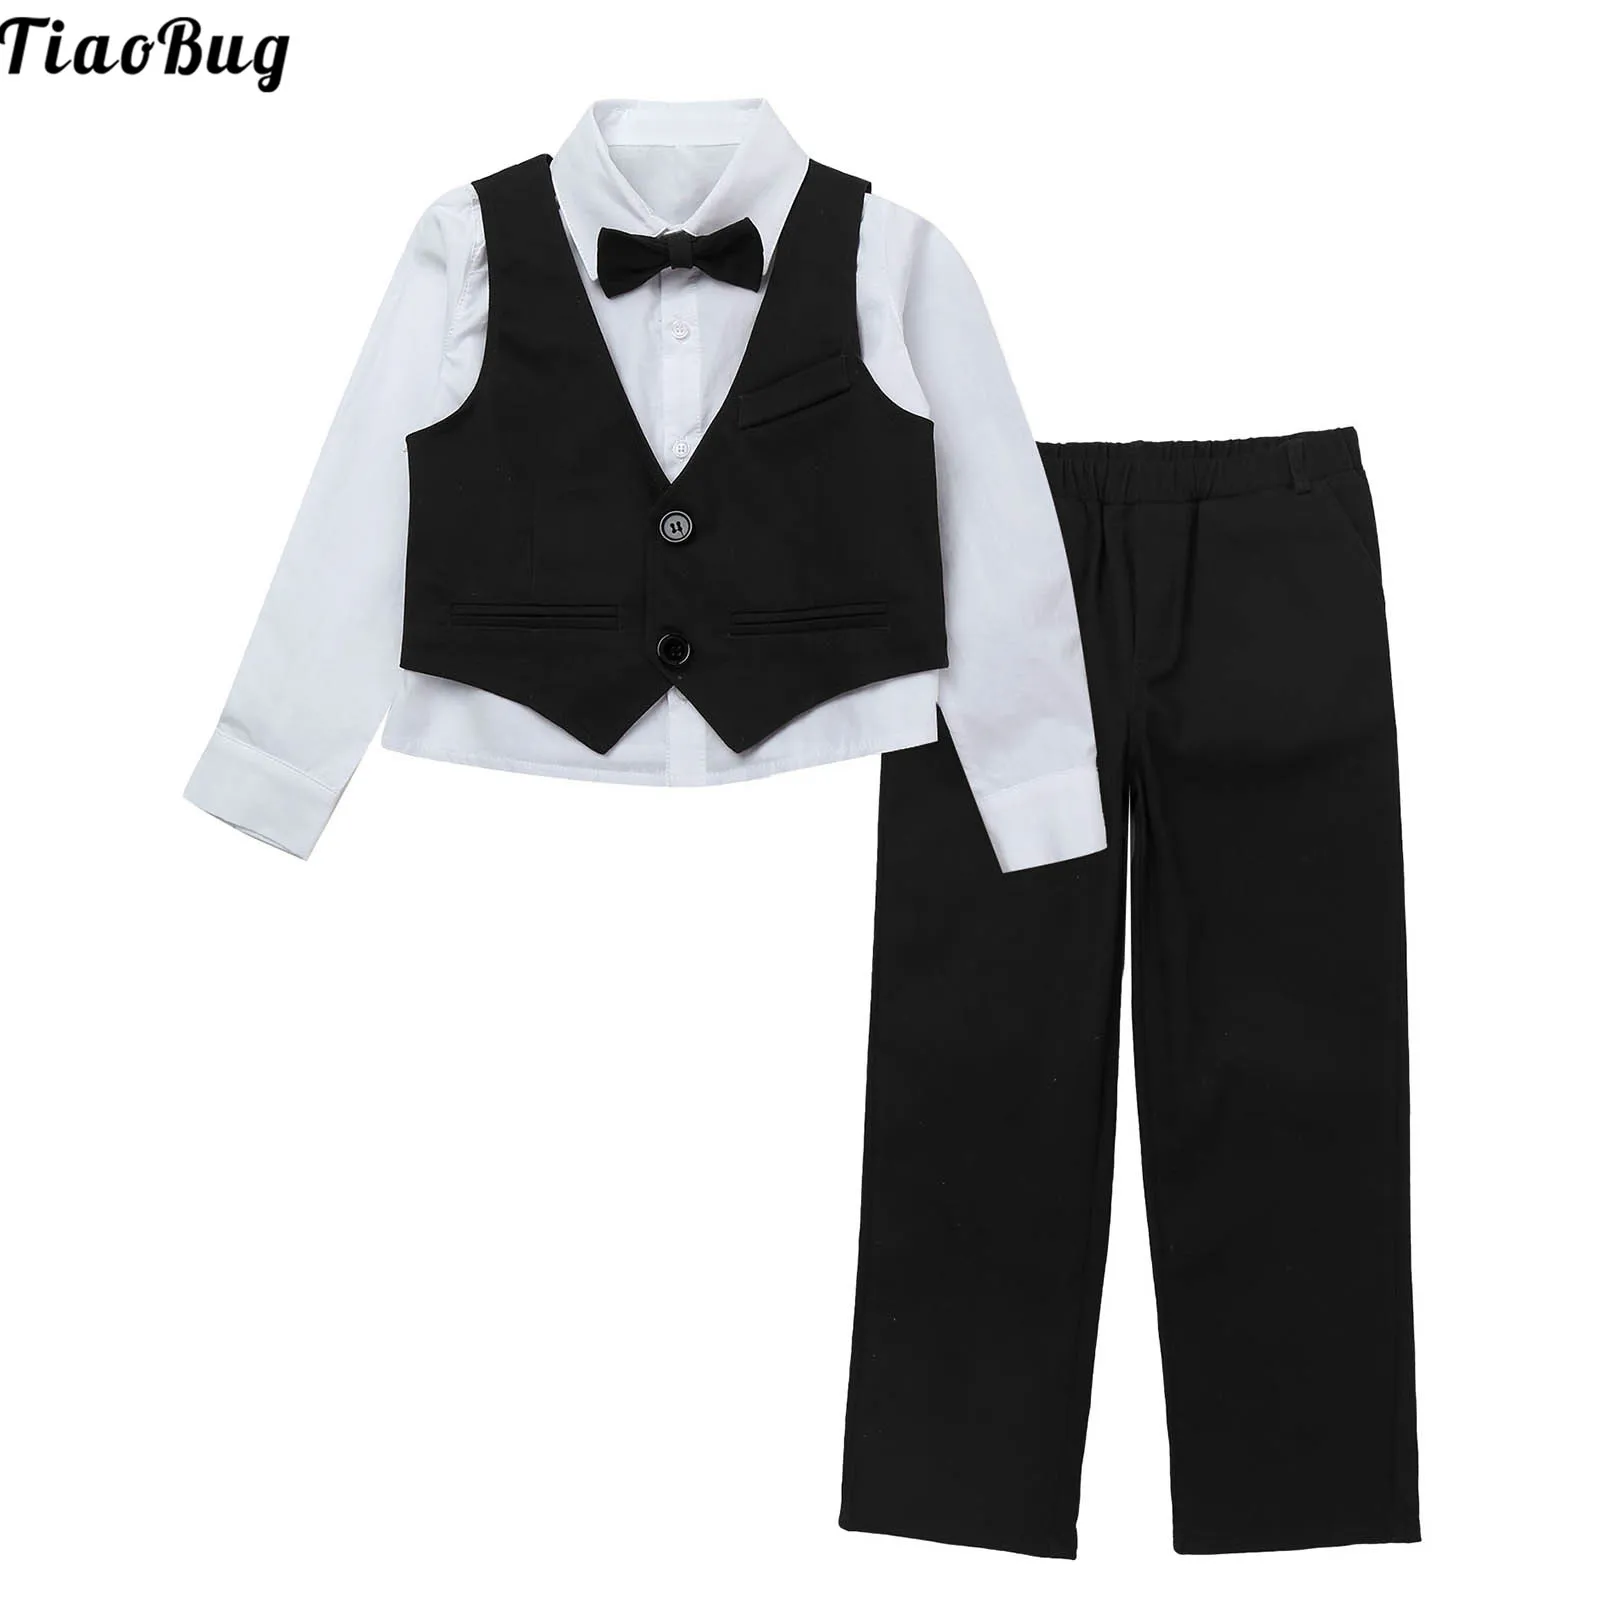 

TiaoBug 4Pcs Kids Boys Suits Long Sleeve Shirt Sleeveless Single-Breasted Vest Pant With Bowknot Set For Wedding Birthday Party